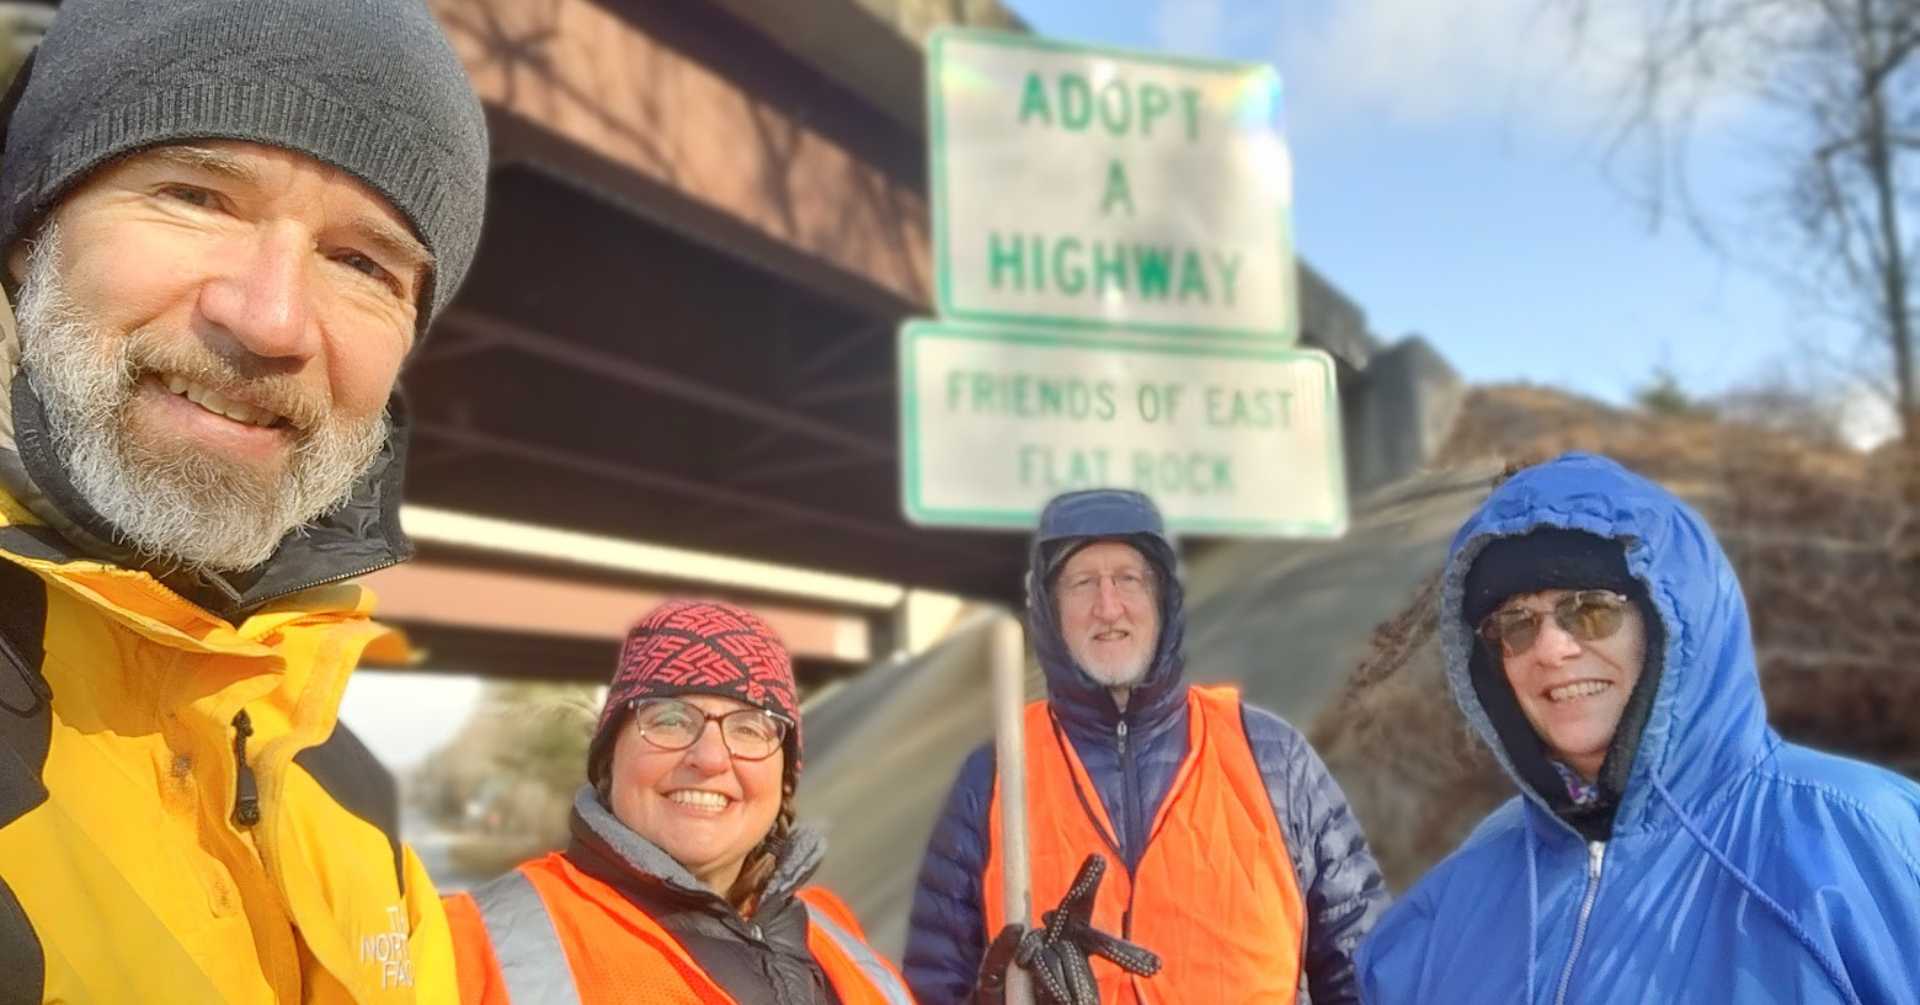 Friends of East Flat Rock Adopt-a-Highway event on January 14, 2023